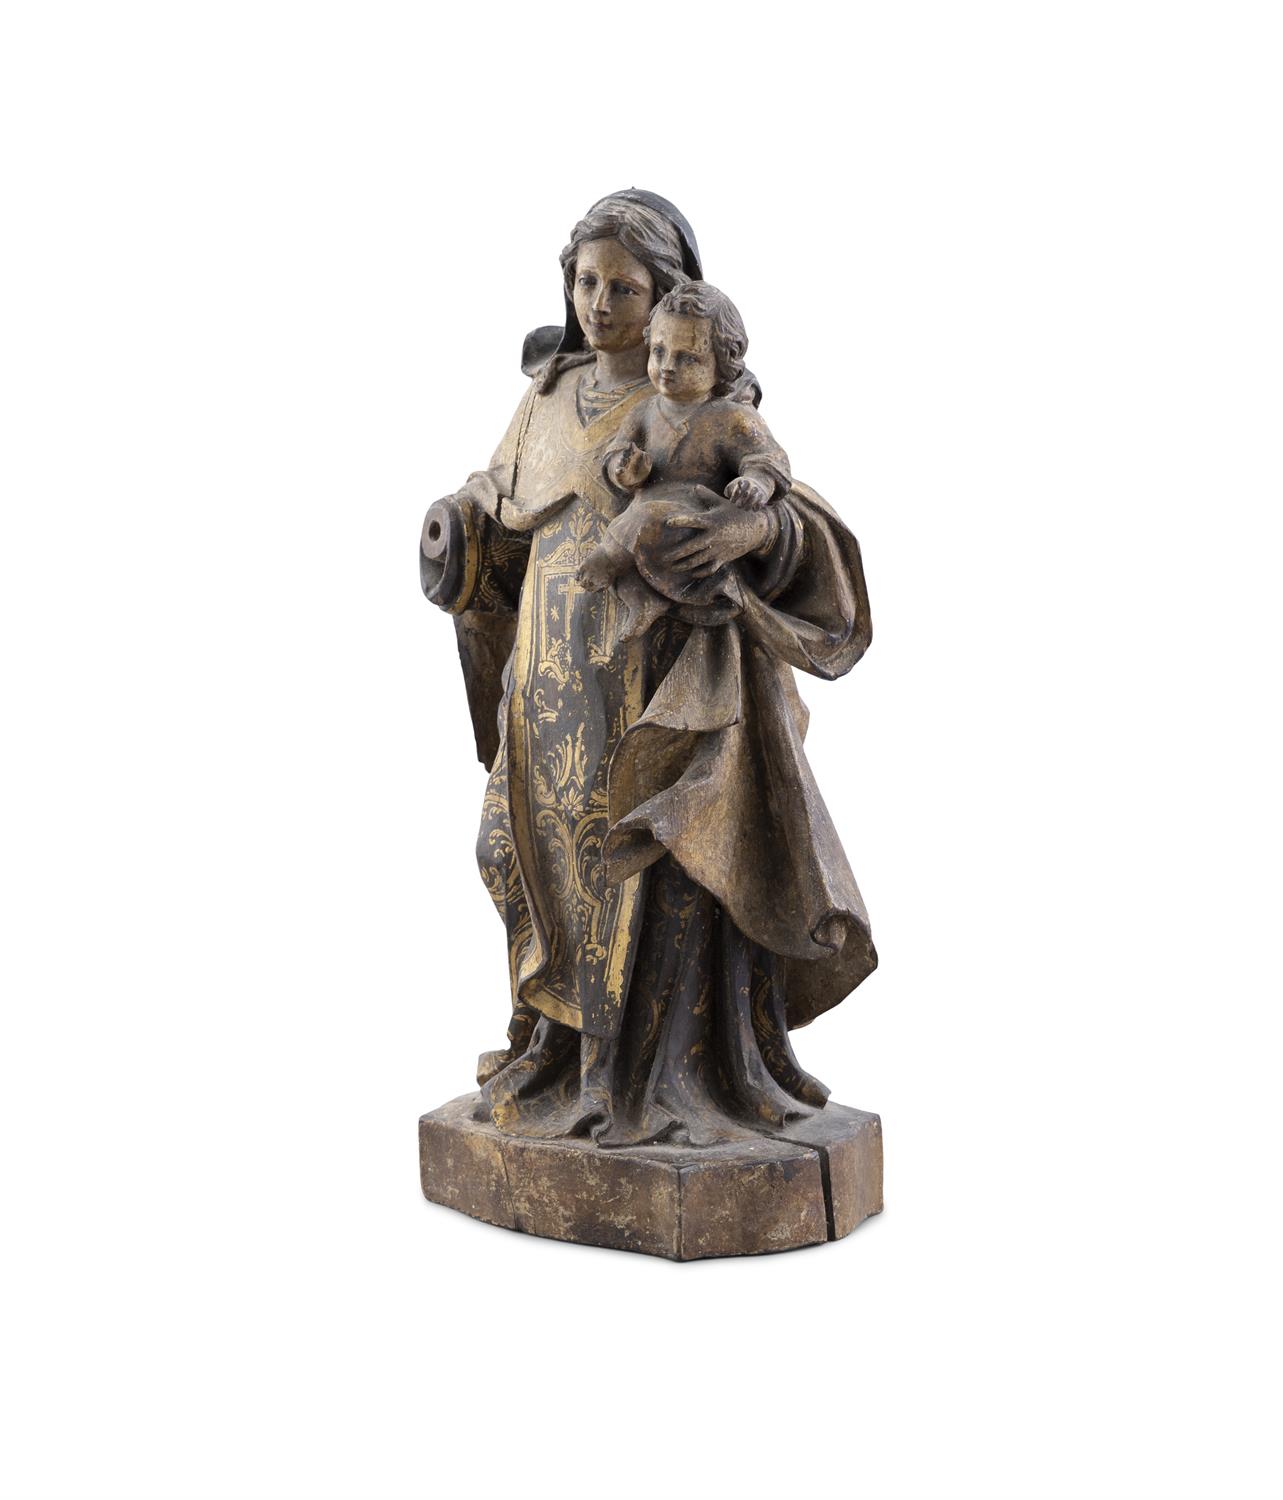 A CARVED WOOD MODEL OF THE MADONNA AND CHILD, 16TH/17TH CENTURY with polychrome decoration. - Image 2 of 6